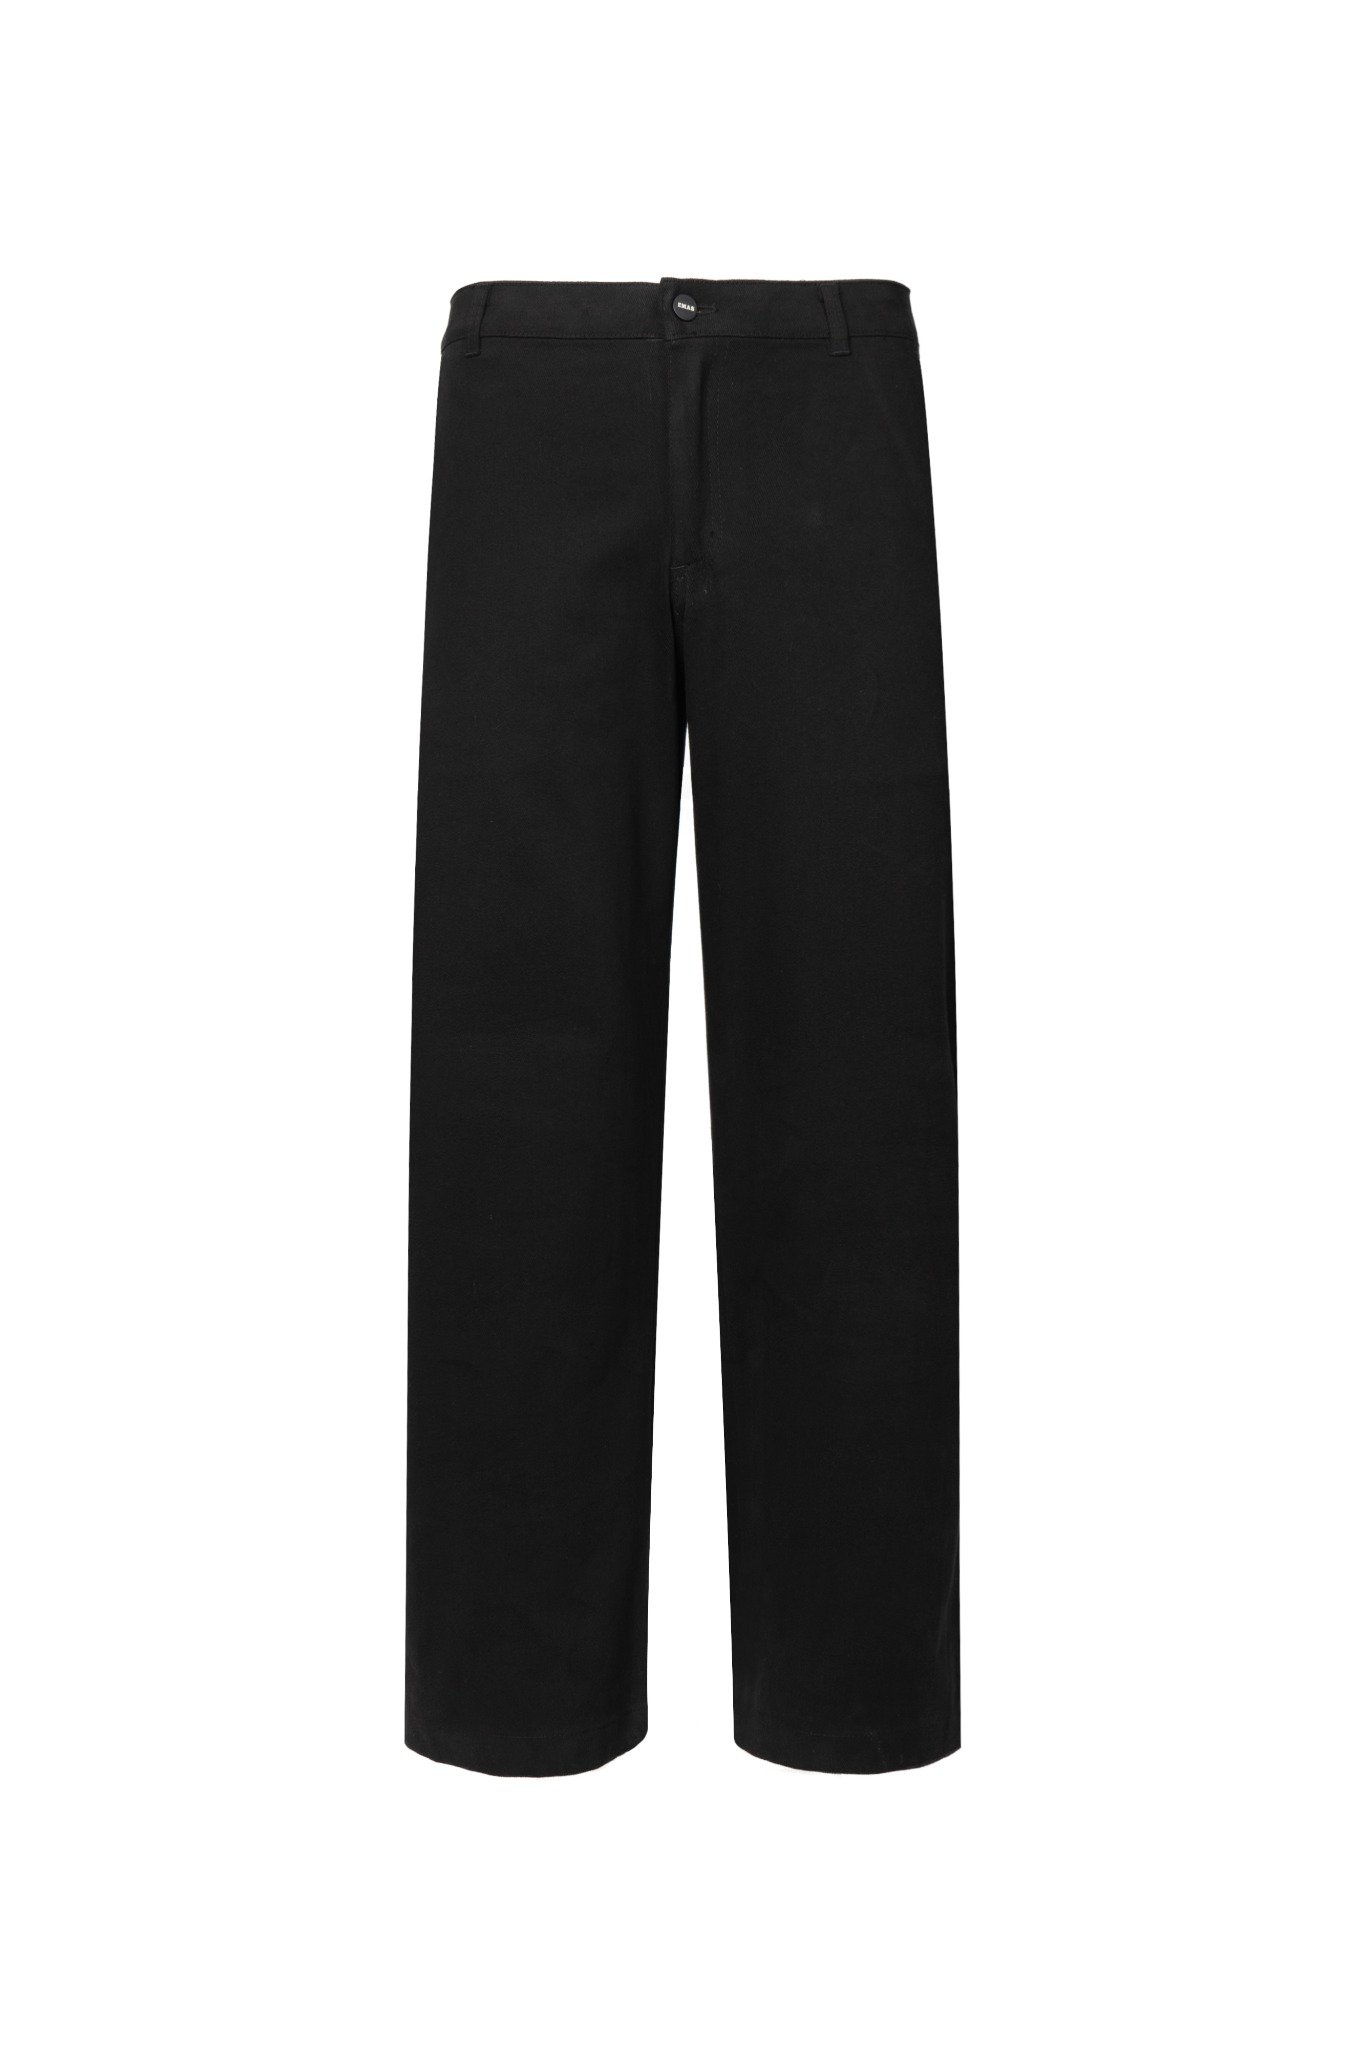  BLACK RELAXED FIT CHINO PANTS 